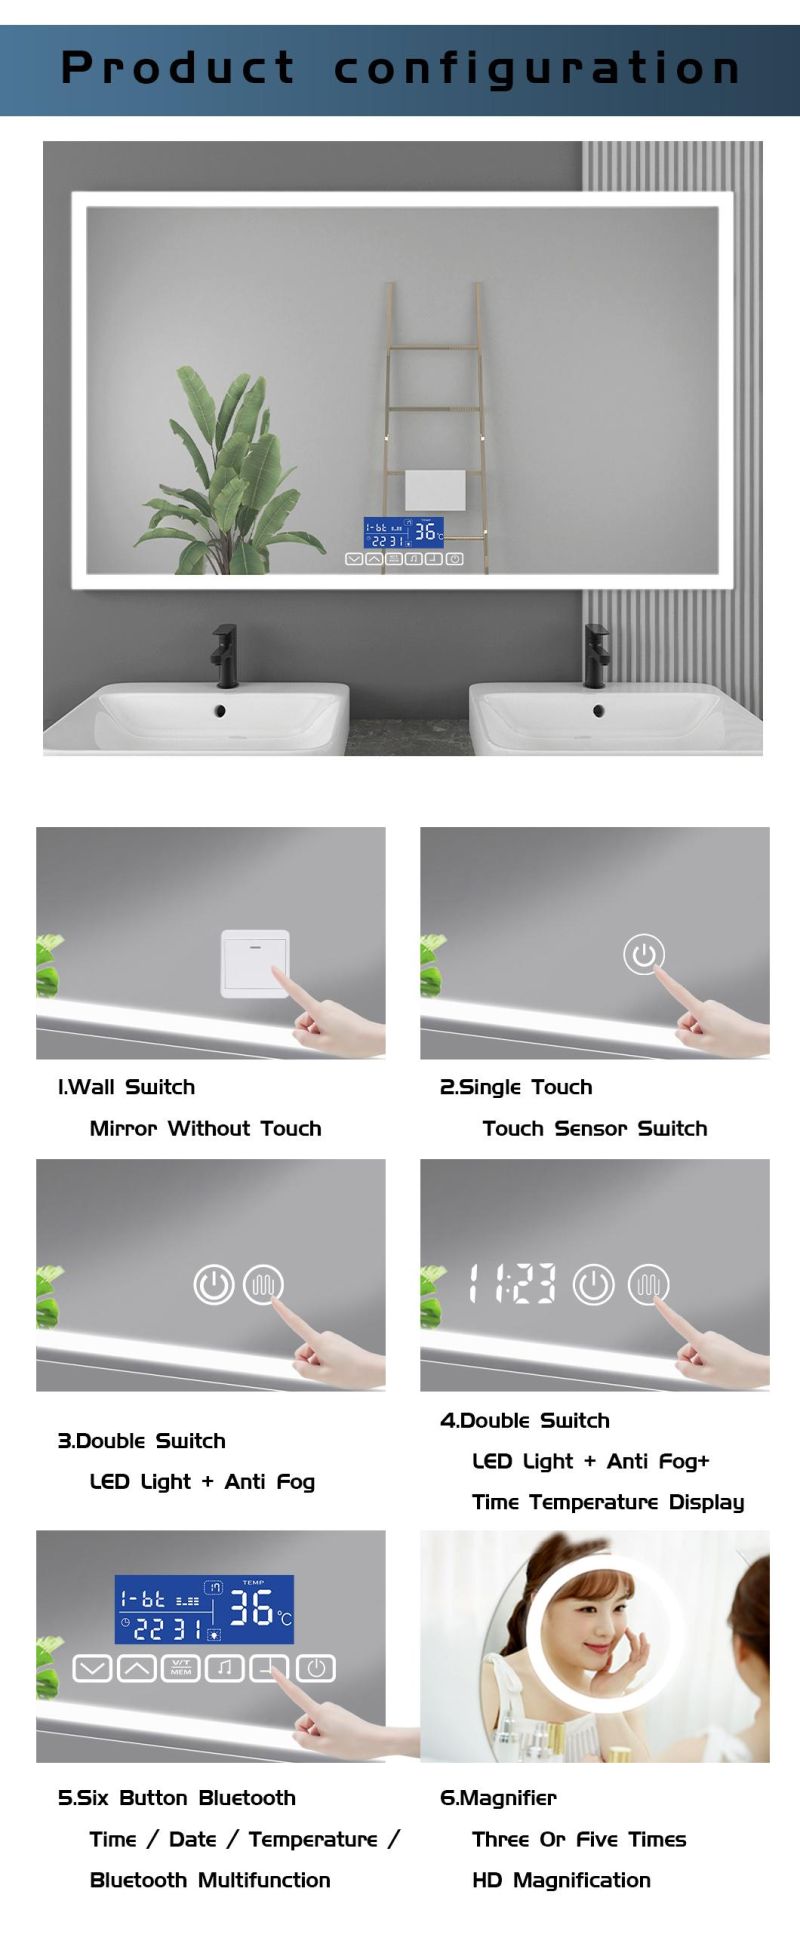 LED Customized Wall Mounted Glass WiFi Magic Mirror Touch Screen Dimmer Bath Lights Smart LED Bathroom Mirror